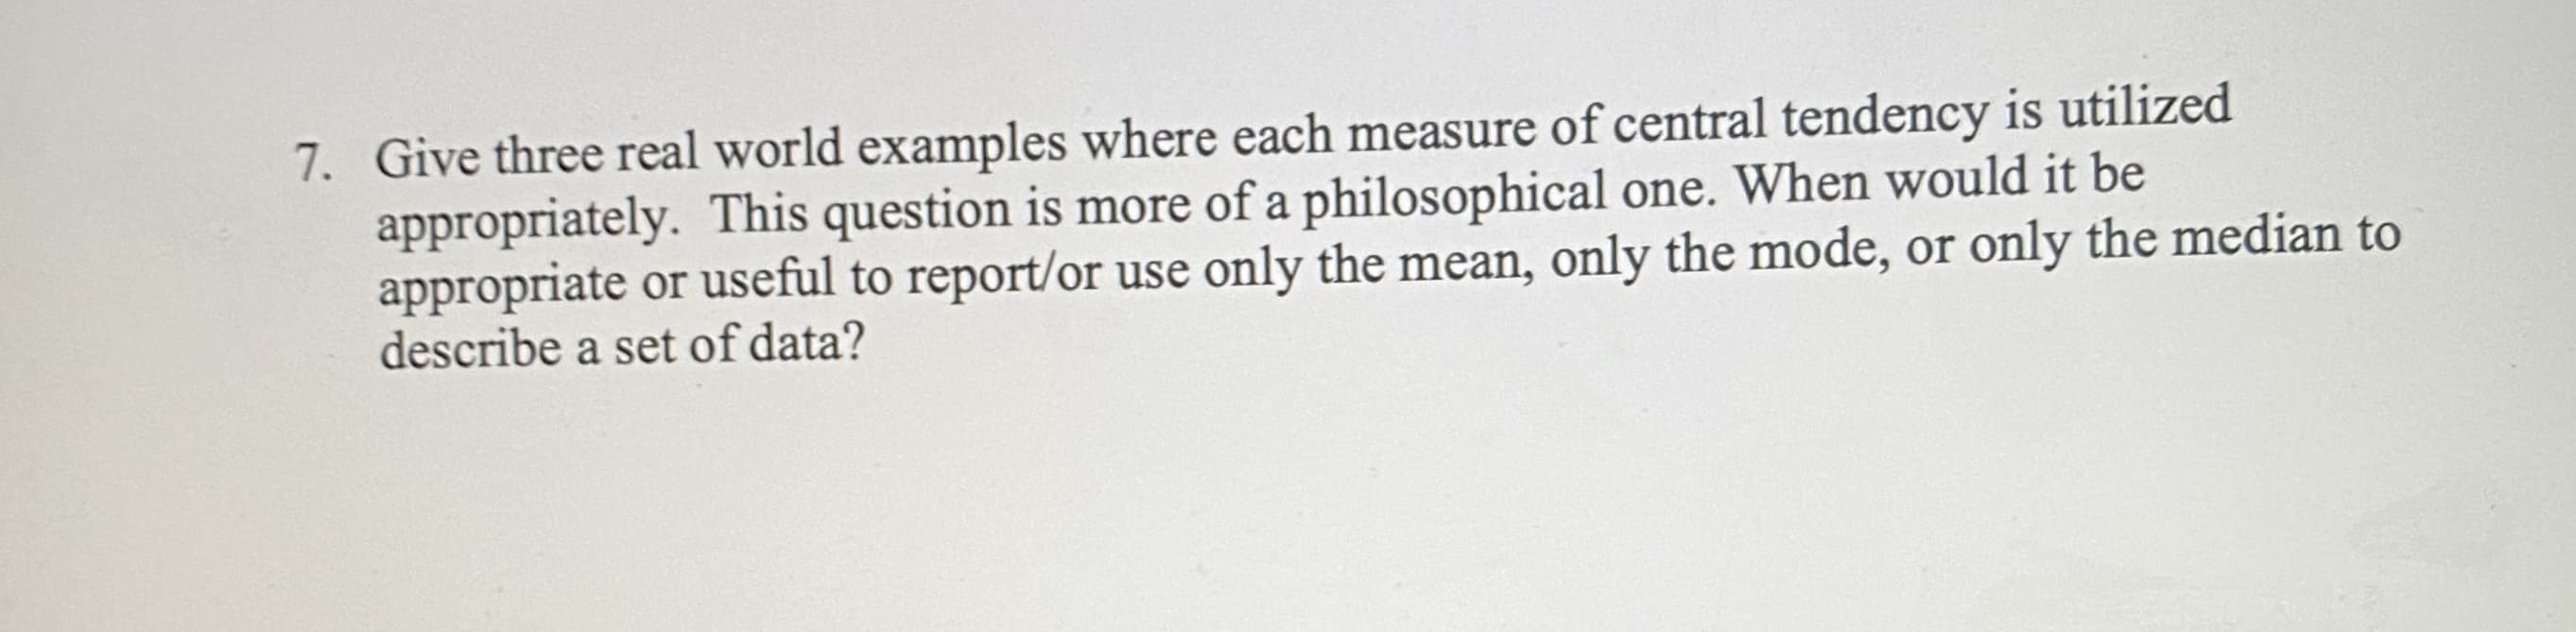 7. Give three real world examples where each measure of central tendency is utilized
appropriately. This question is more of a philosophical one. When would it be
appropriate or useful to report/or use only the mean, only the mode, or only the median to
describe a set of data?
